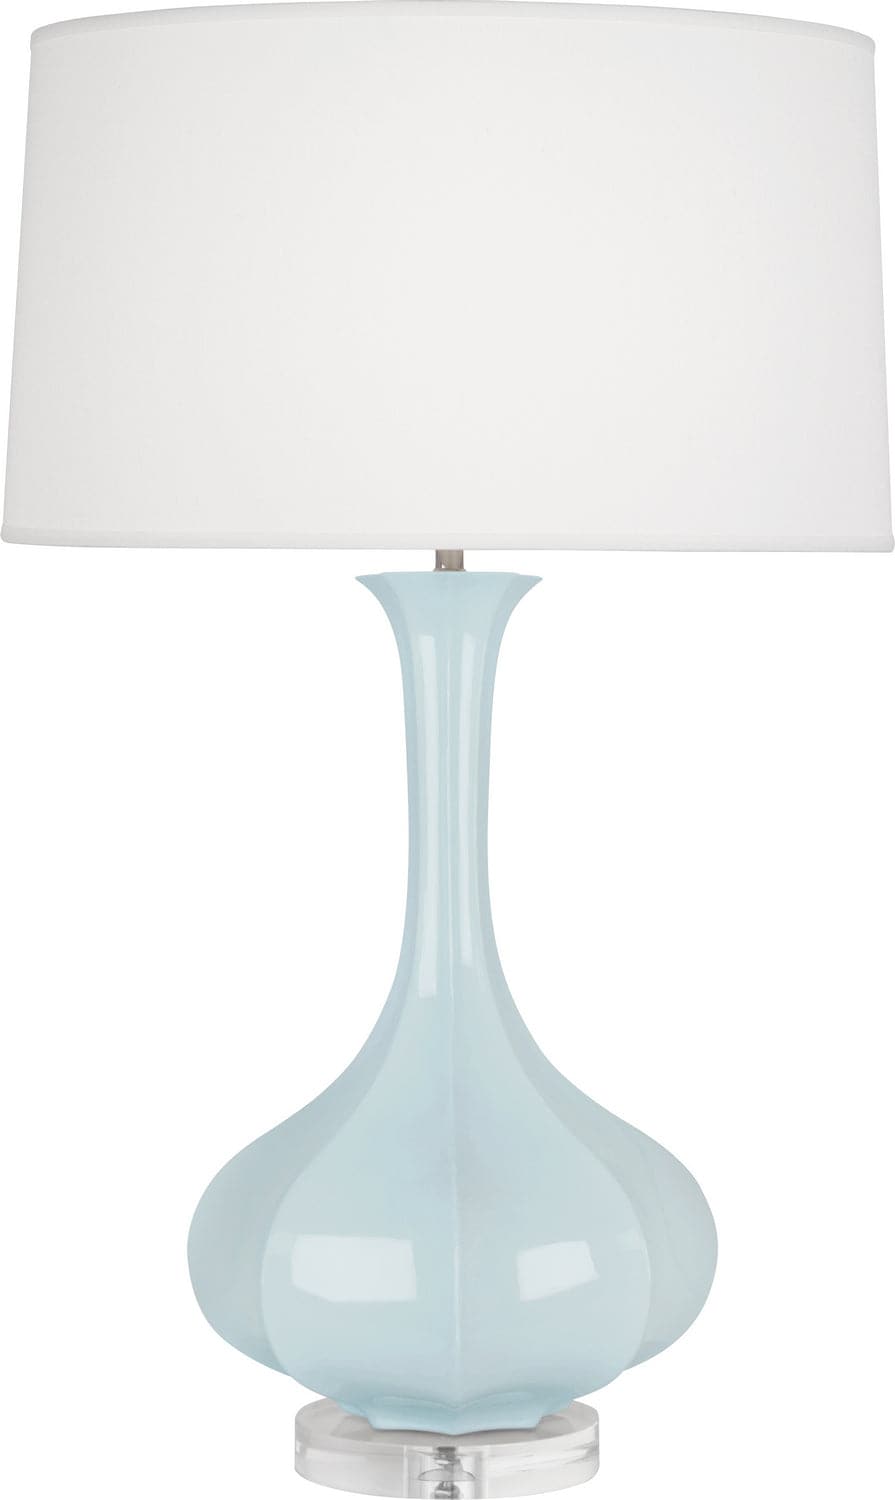 Robert Abbey - BB996 - One Light Table Lamp - Pike - Baby Blue Glazed